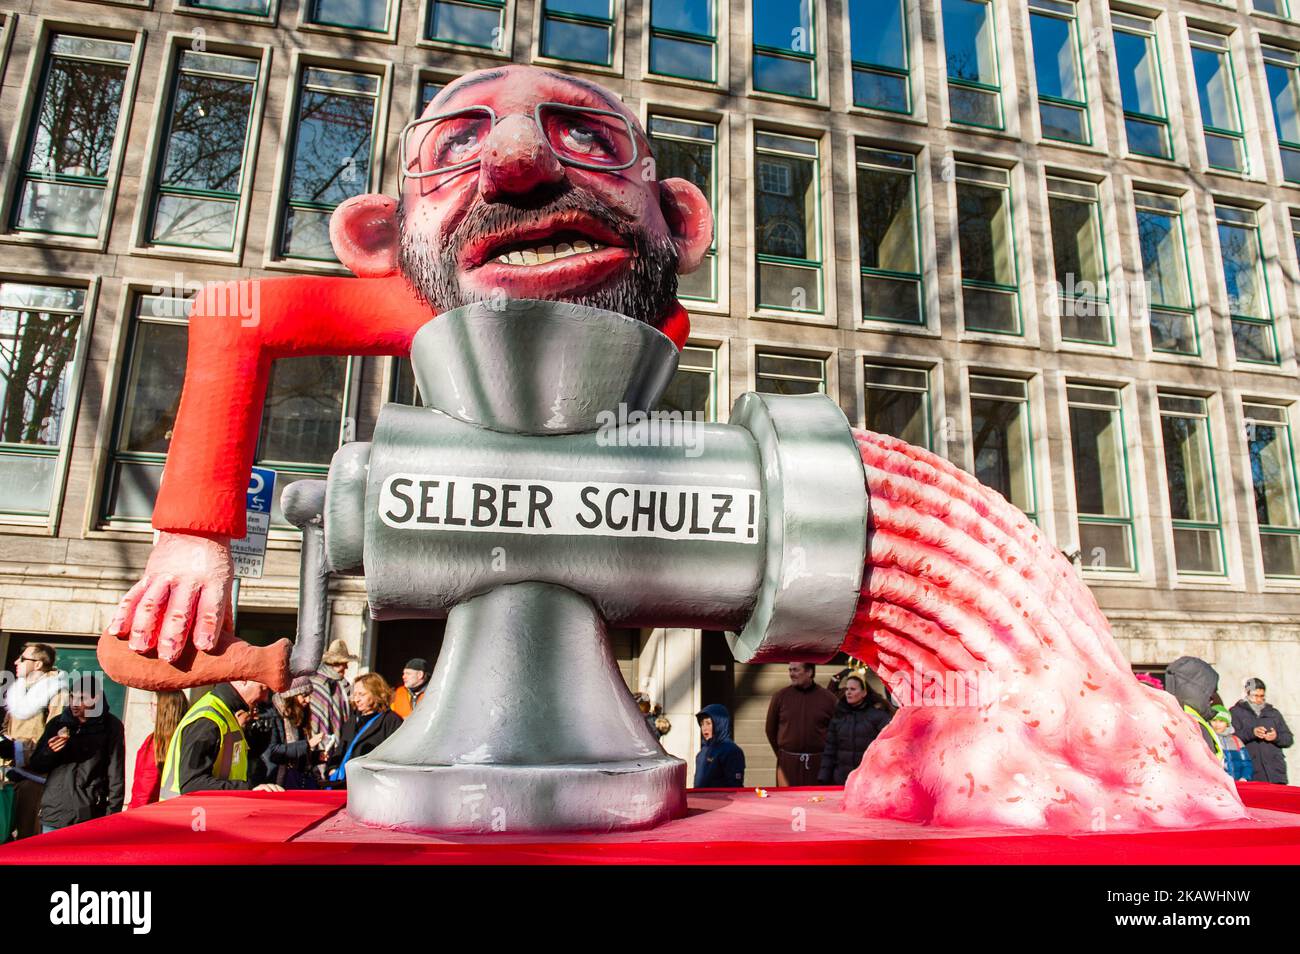 A float featuring Martin Schulz is seen prior to the annual Rose Monday parade on February 12, 2018 in Dusseldorf, Germany. Political satire is a traditional cornerstone of the annual parades. More than 30 music ensembles and 5,000 participants join the procession through the city. Elaborately built and decorated floats address cultural and political issues and can be satirical, hilarious and even controversial. The politically themed floats of satirist Jacques Tilly are famous the world over. (Photo by Romy Arroyo Fernandez/NurPhoto) Stock Photo